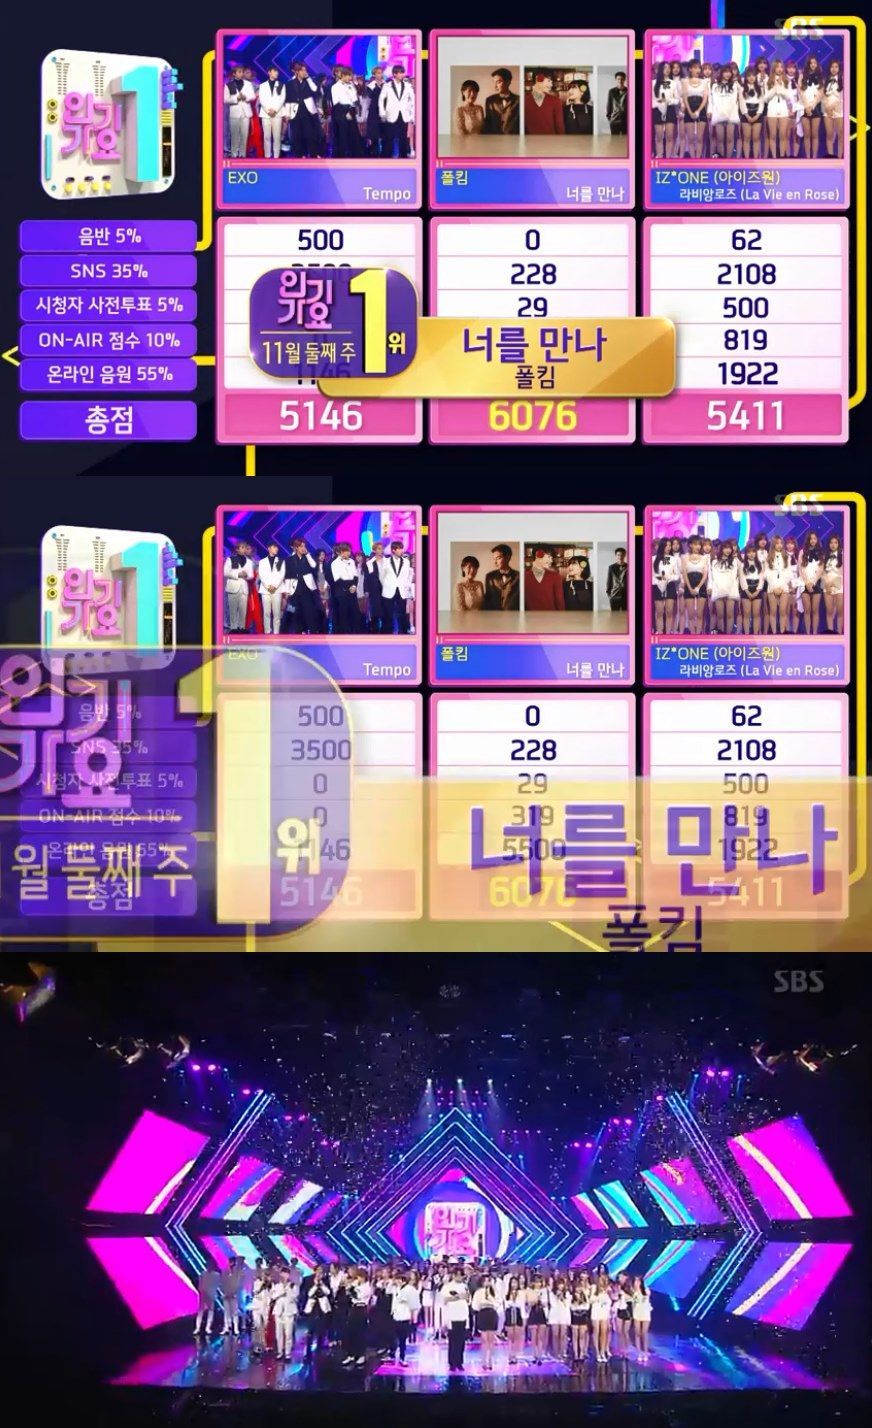 On SBS Inkigayo broadcasted on the 11th, EXO tempo IZ*ONE Lavian Rose Paul Kim meet you was the first placeHe was nominated. Paul Kim, who did not appear on the show, won a surprise trophy.If you look at the detailed score, Paul Kim was 0 on the record, but his sound record alone surpassed IZ*ONEs 5411.EXO, who became a candidate, stayed in third place with zero points in viewer pre-voting and on-air scores.EXO, Twice, Shiny Key, Kwill, Chae Yeon, IZ*ONE, Wikimikki, Monster X, April, Golden Child, Stray Kids, Sohee, Seven Clac, ATIZ, Park Sung Yeon appeared.